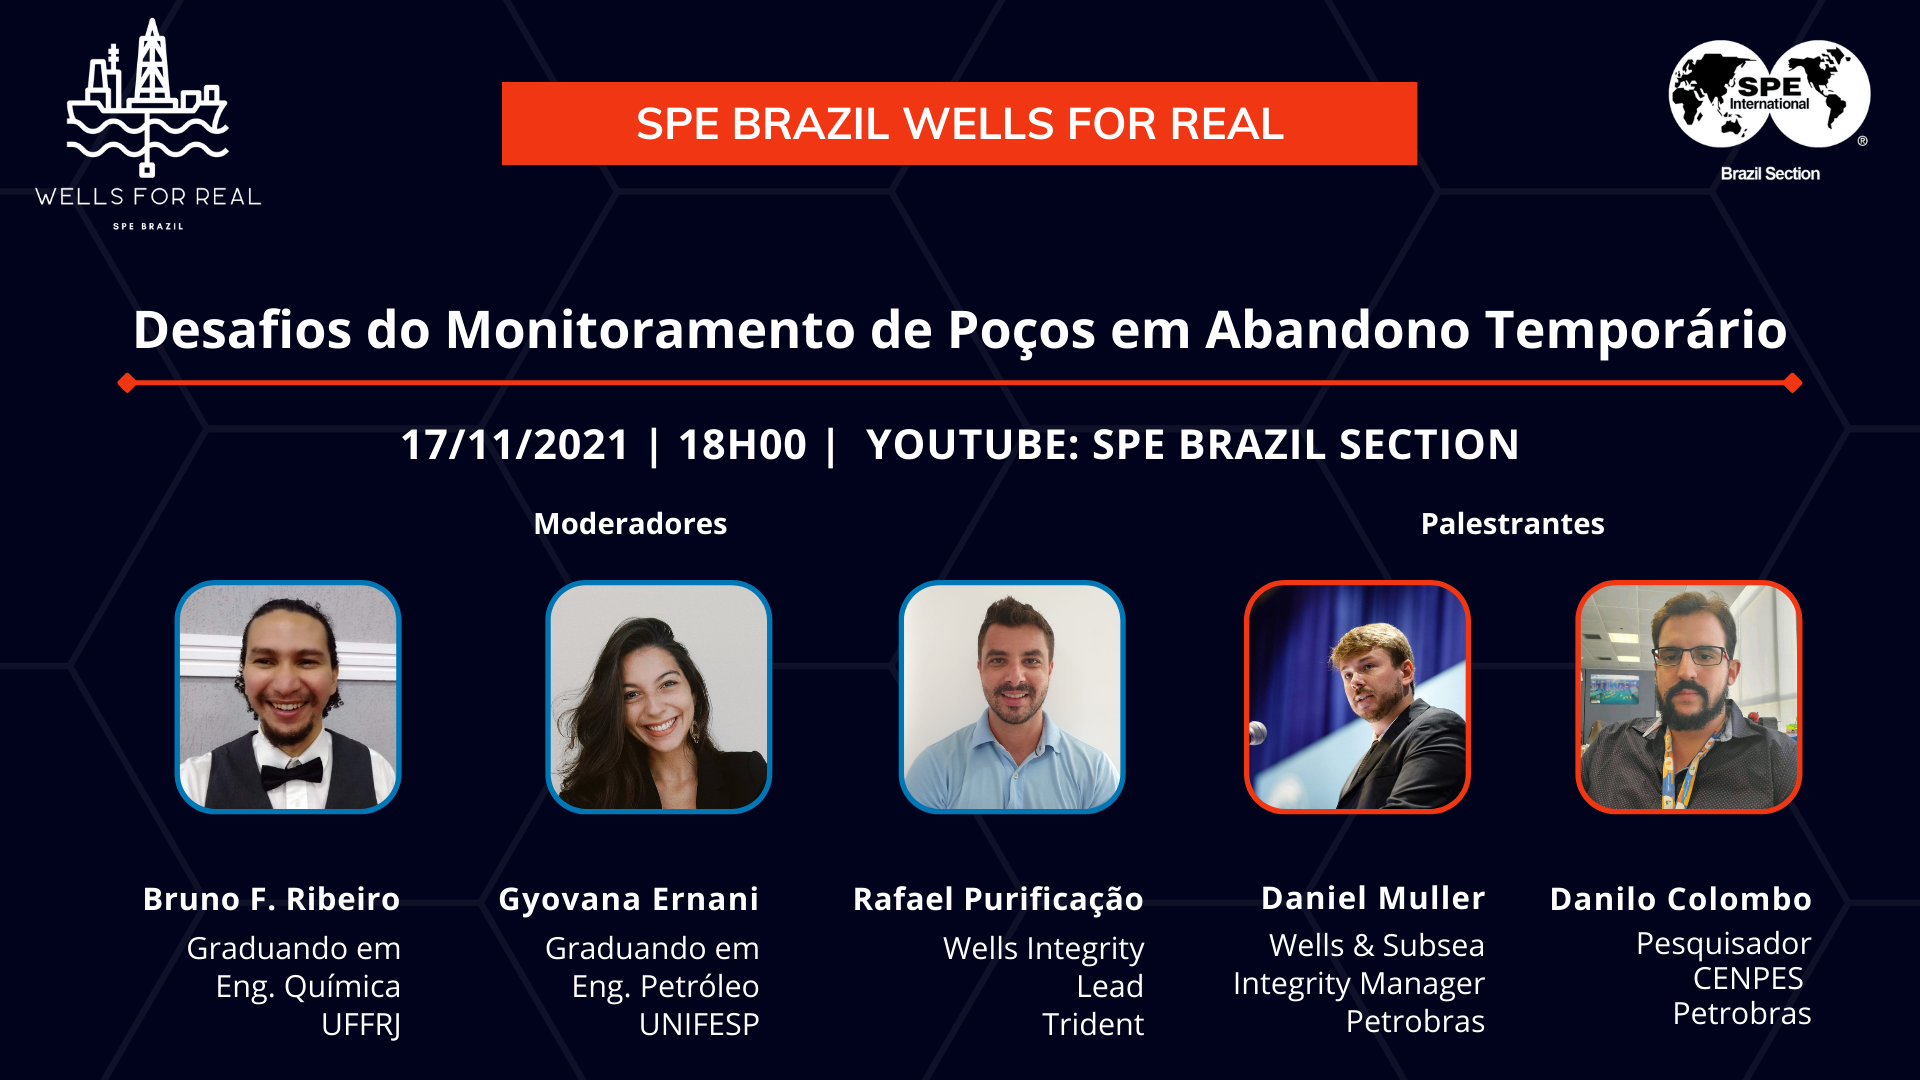 SPE BRAZIL WELLS FOR REAL